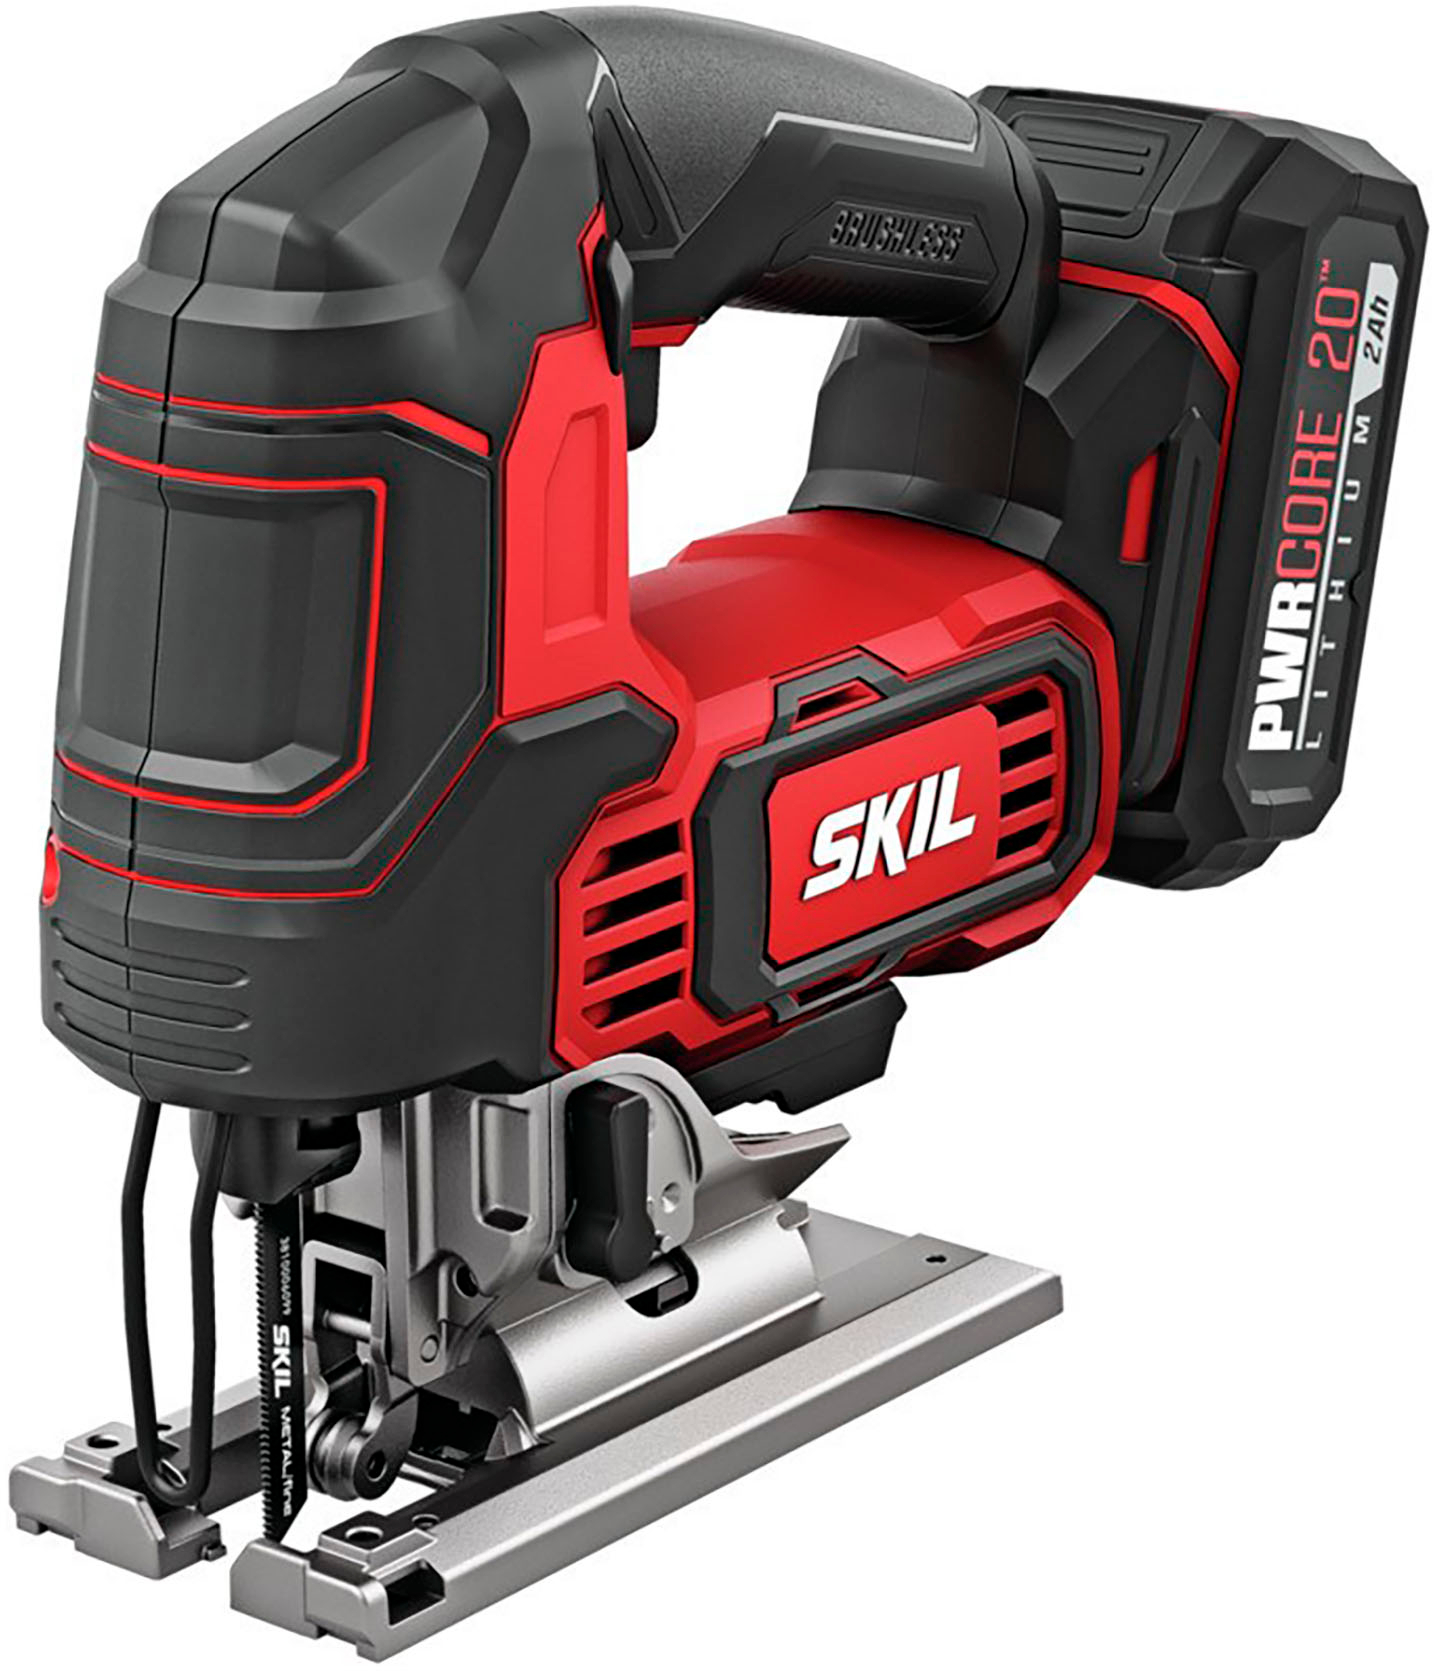 Skil PWR CORE 20 Brushless 20V Jigsaw Kit with Battery and PWR JUMP Charger  Red JS820202 Best Buy